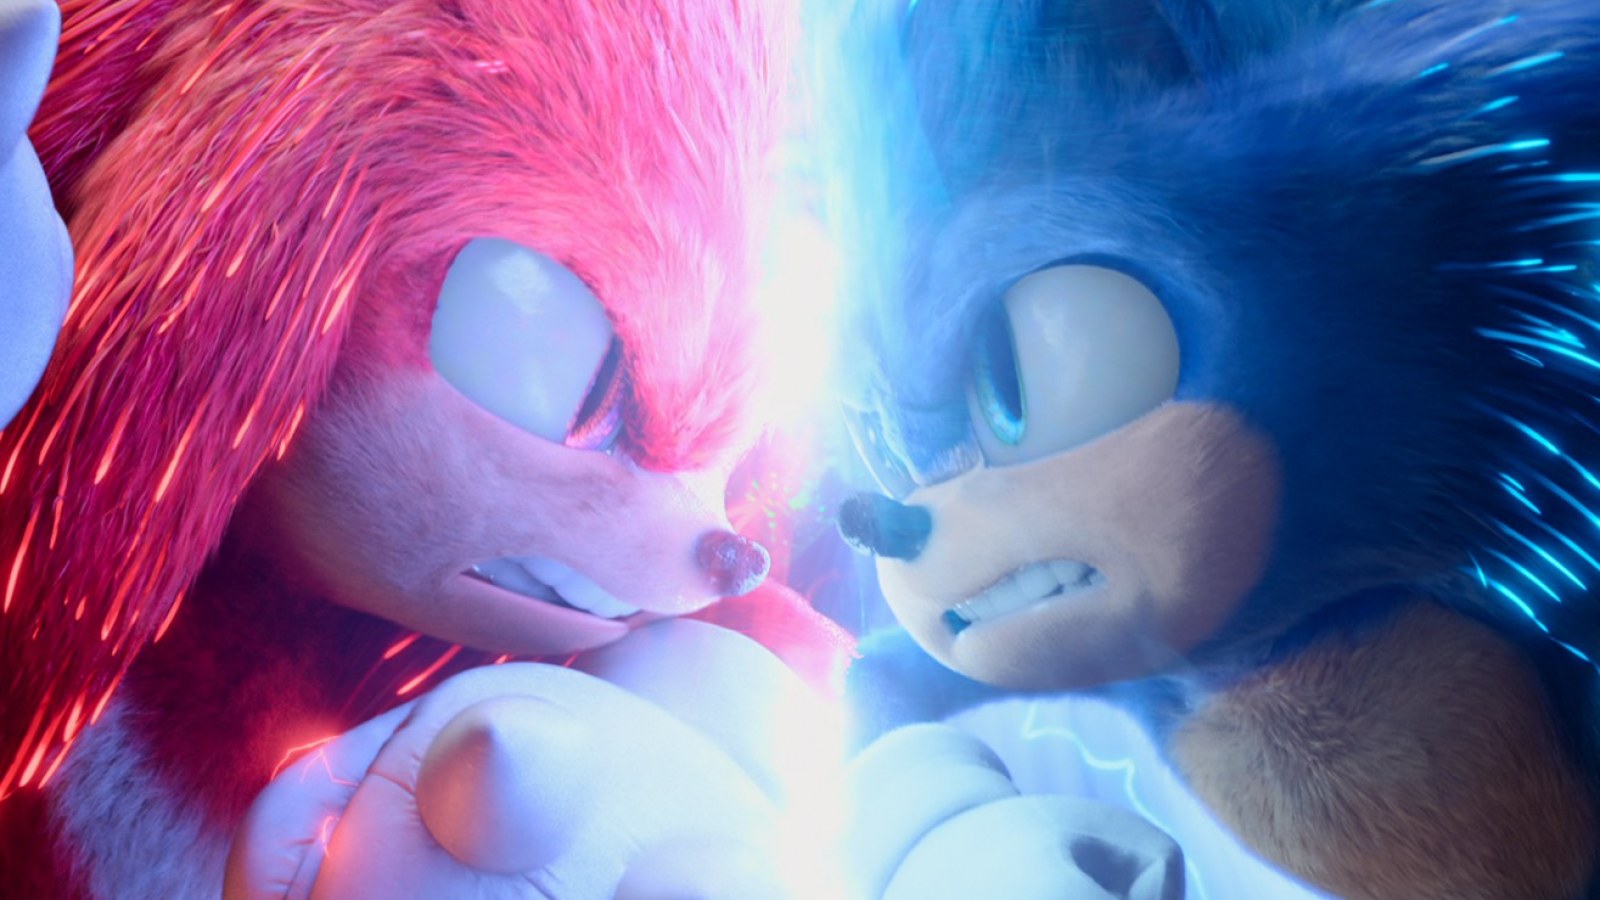 Sonic the Hedgehog 2' Cast: Here's Who Voices Sonic, Tails and Knuckles